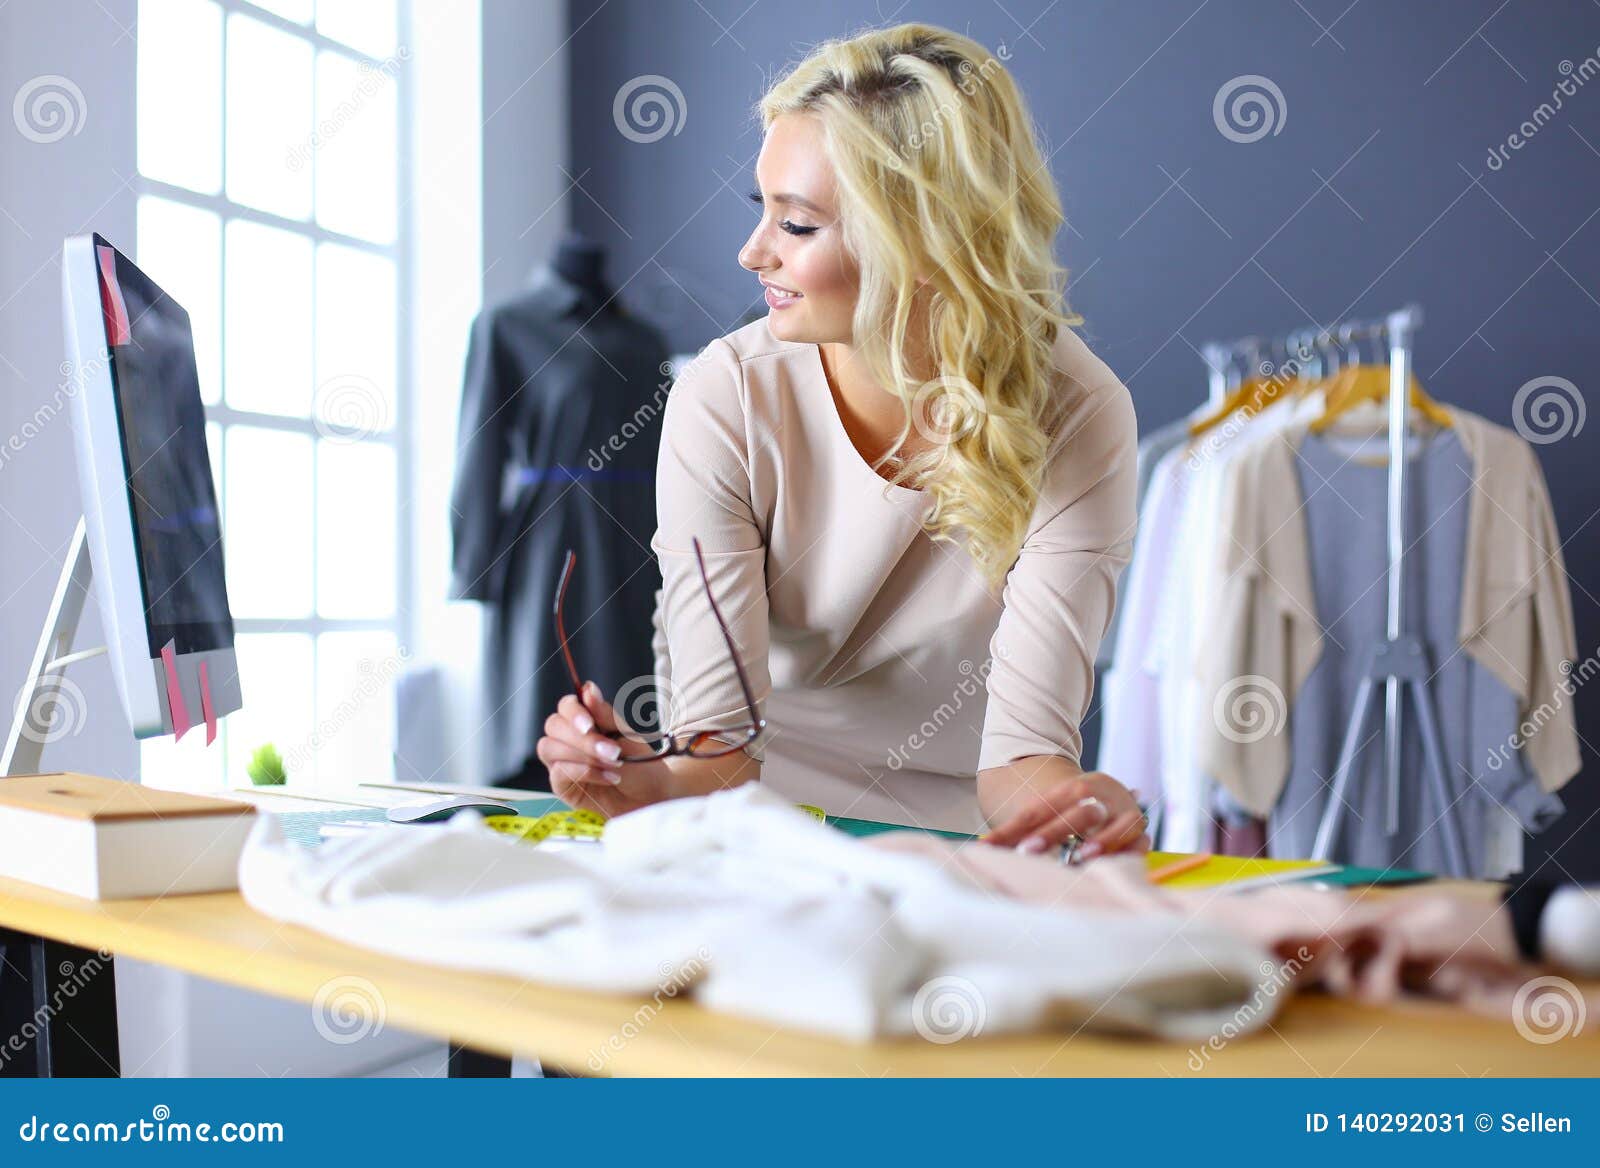 Fashion Designer Woman Working on Her Designs in the Studio. Stock ...